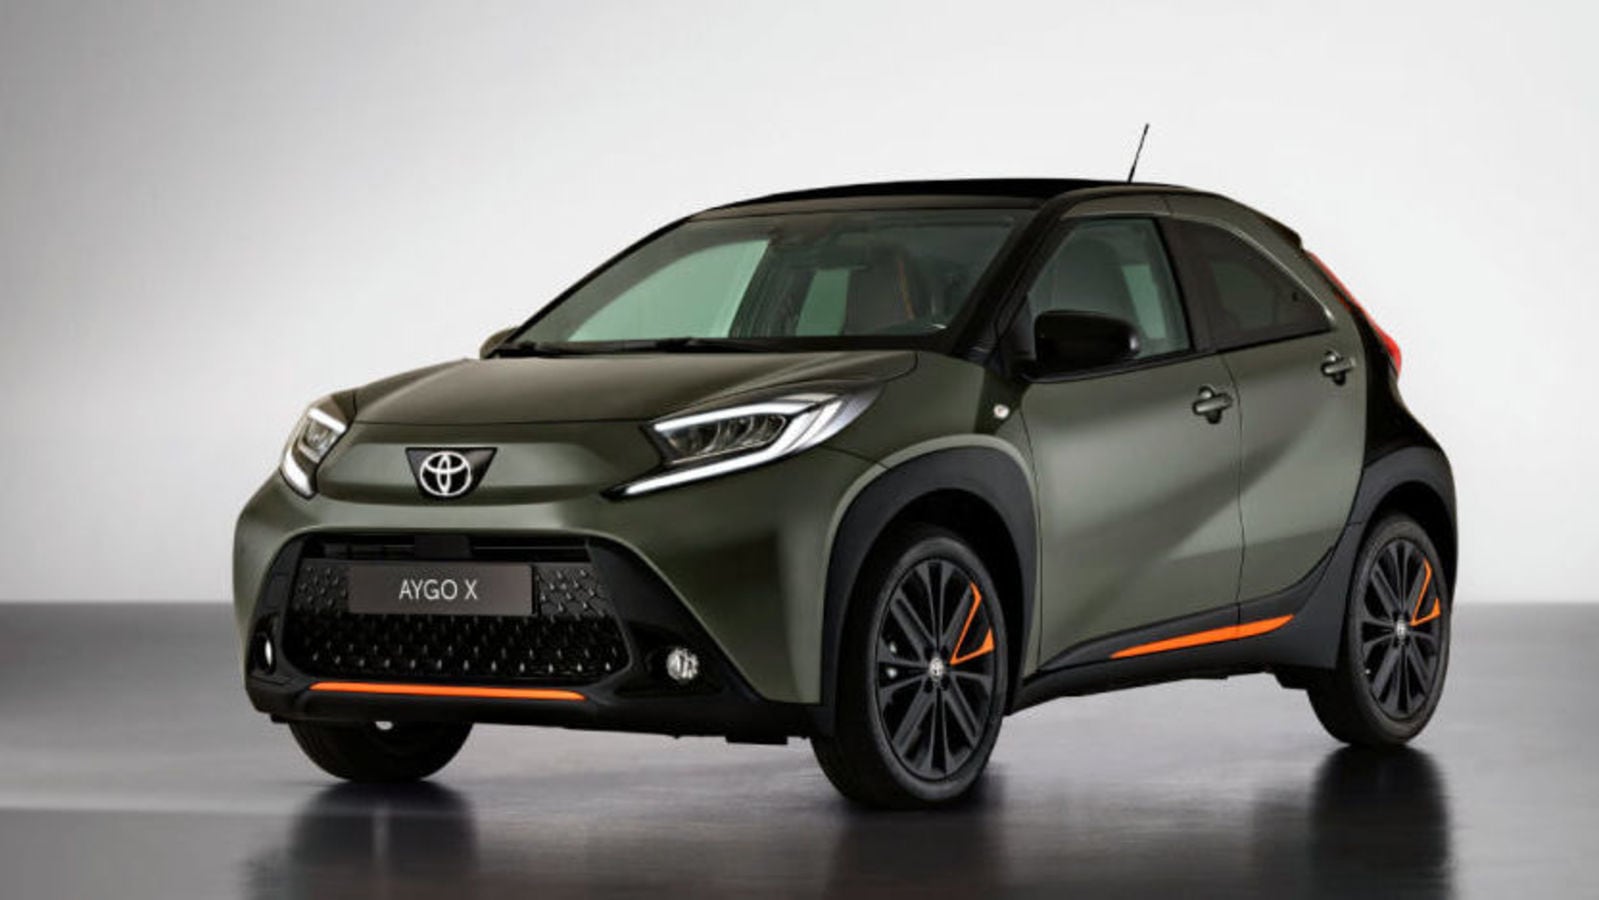 Toyota Aygo X car can take on Tata Punch HT Auto